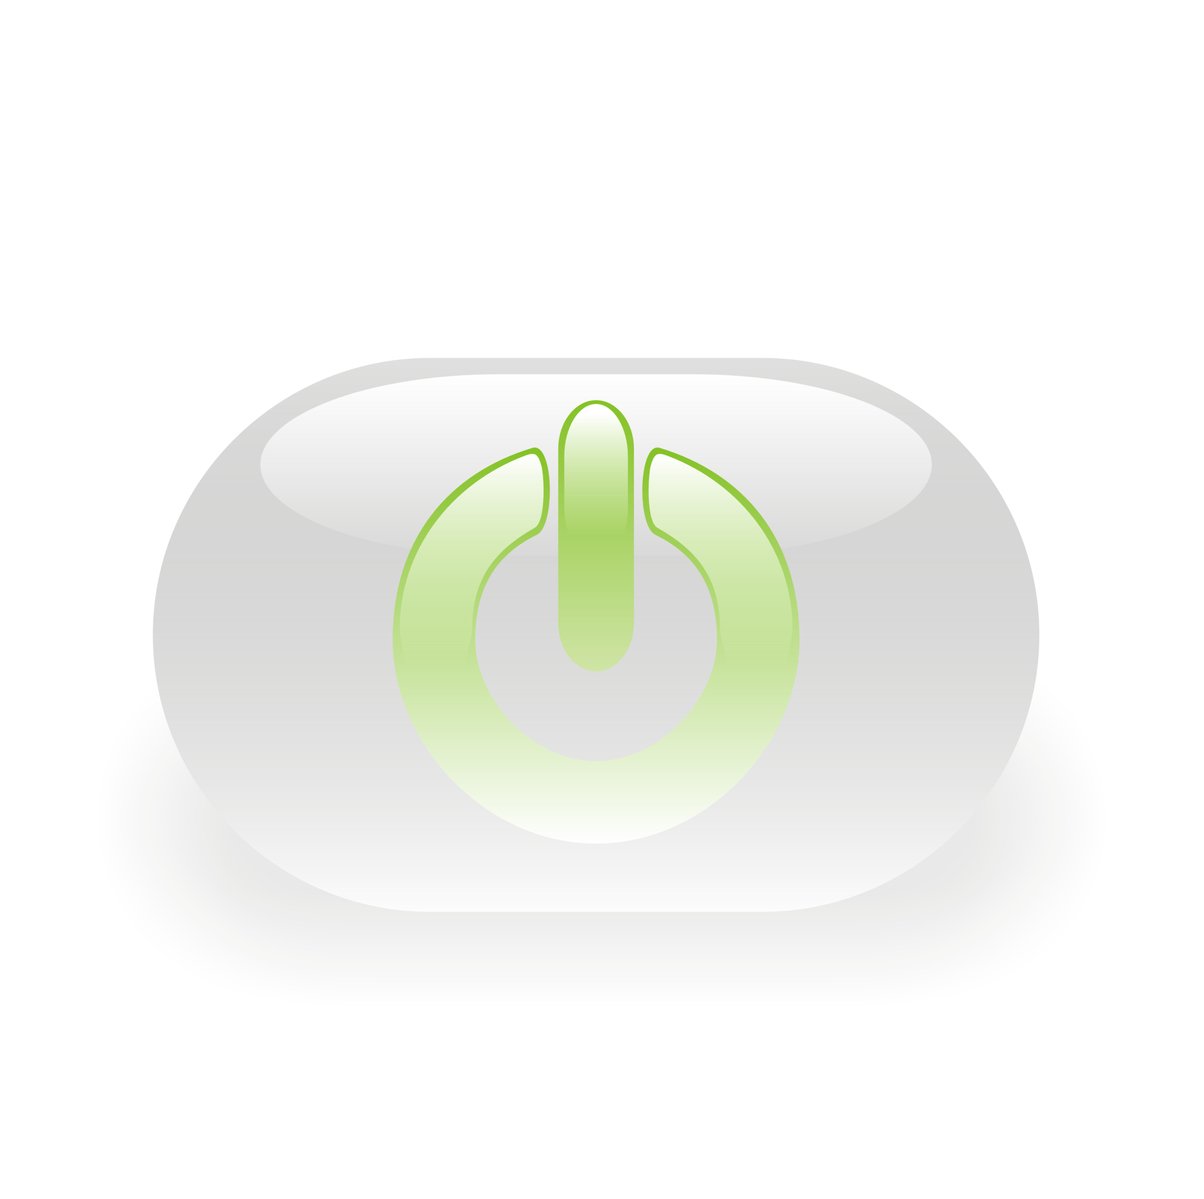 an app icon showing a green on with a rounded frame